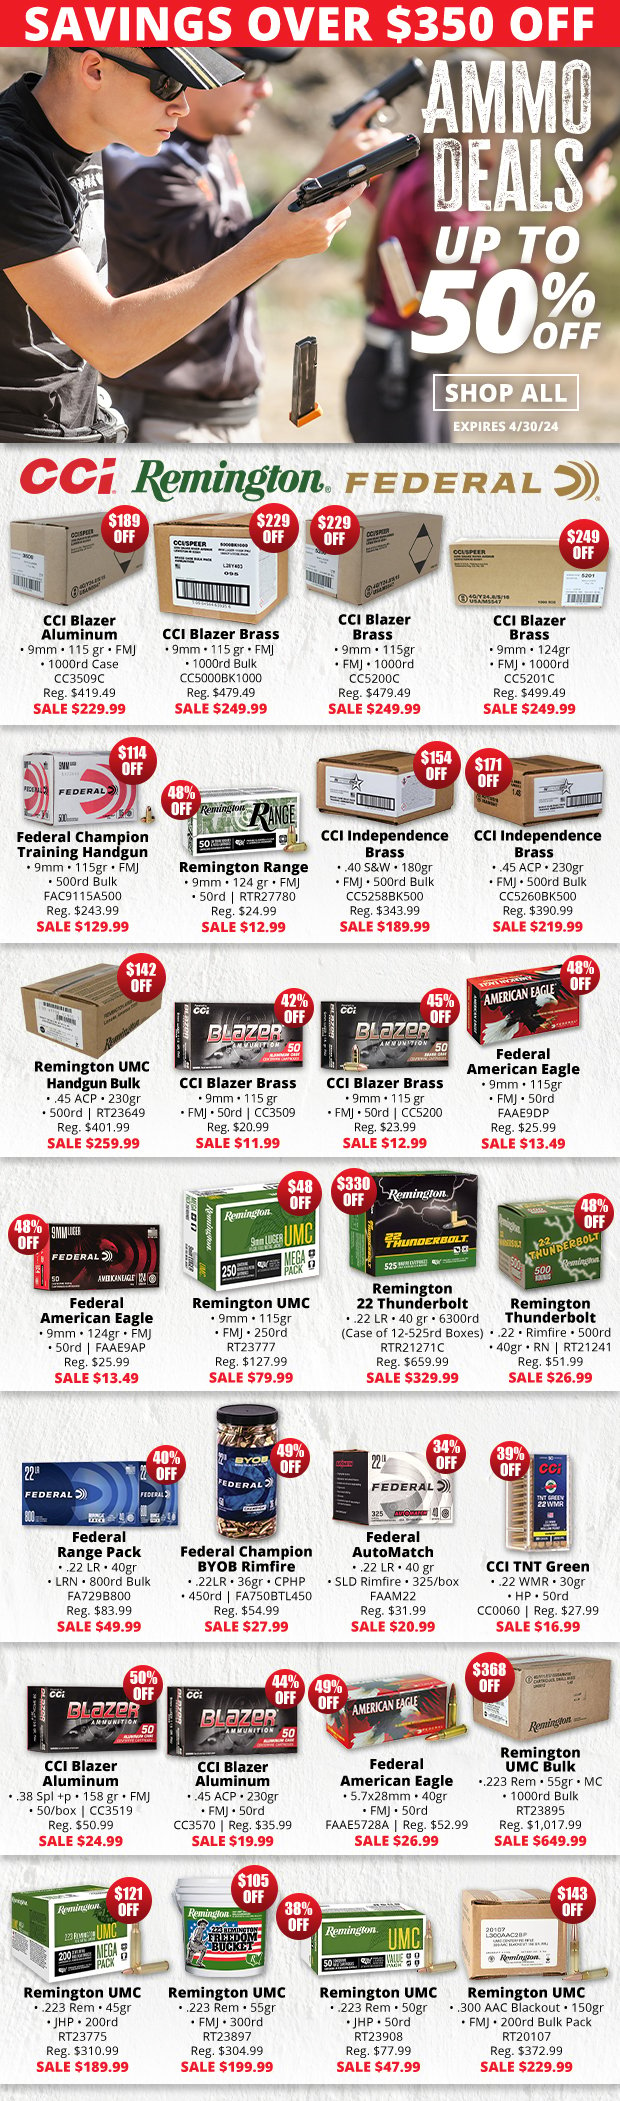 Up to 50% Off Ammo Deals!